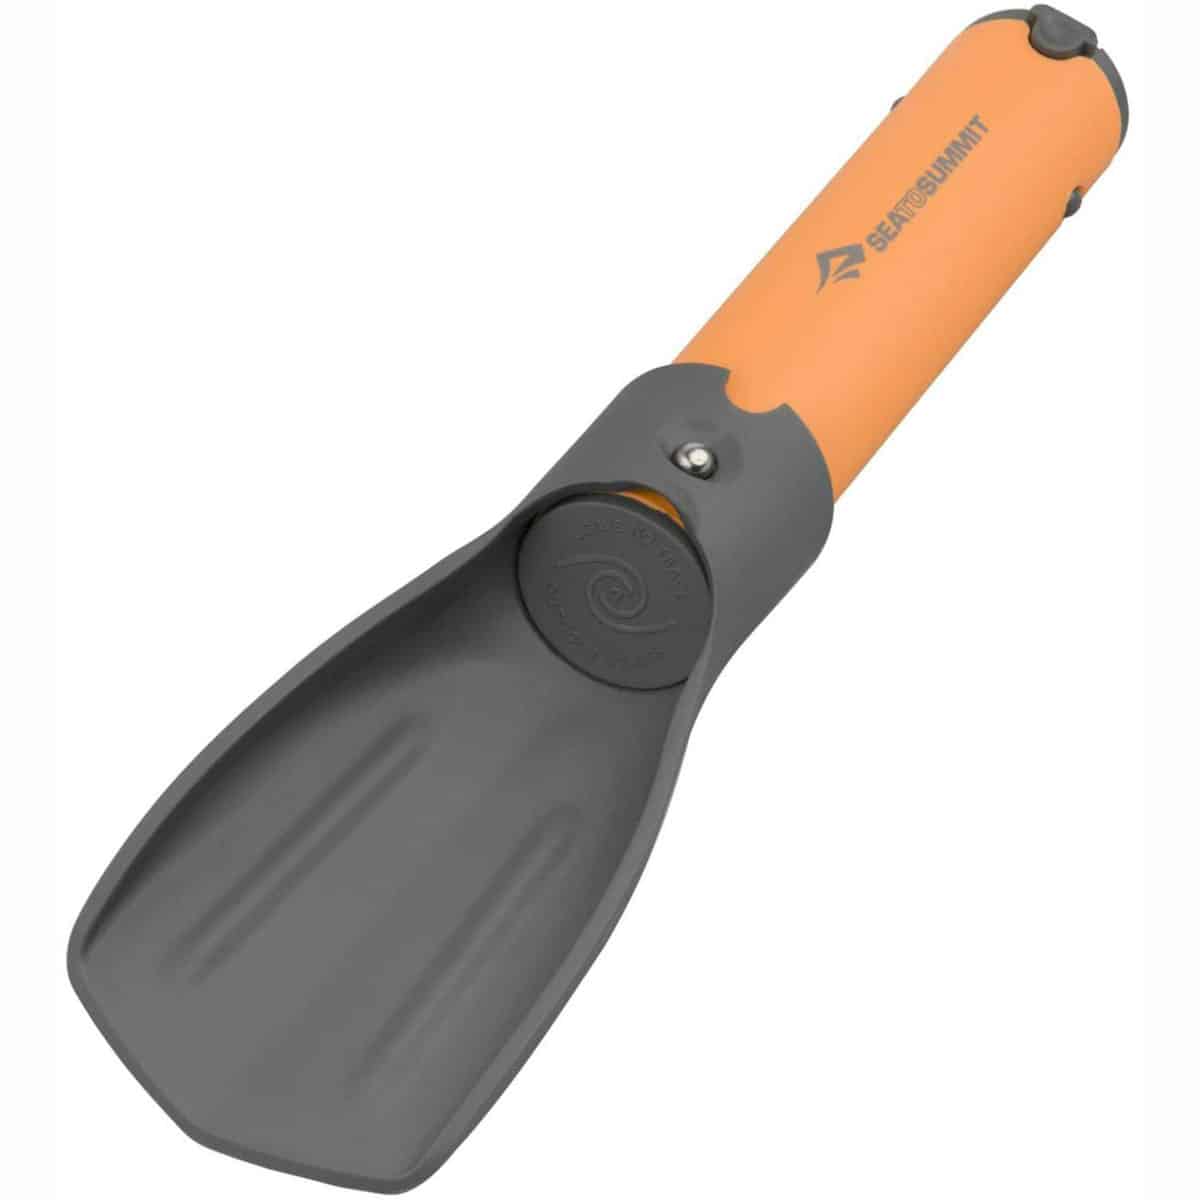 The Sea To Summit Pocket Trowel is a strong and ultralight digging tool fit for any outdoor adventure.